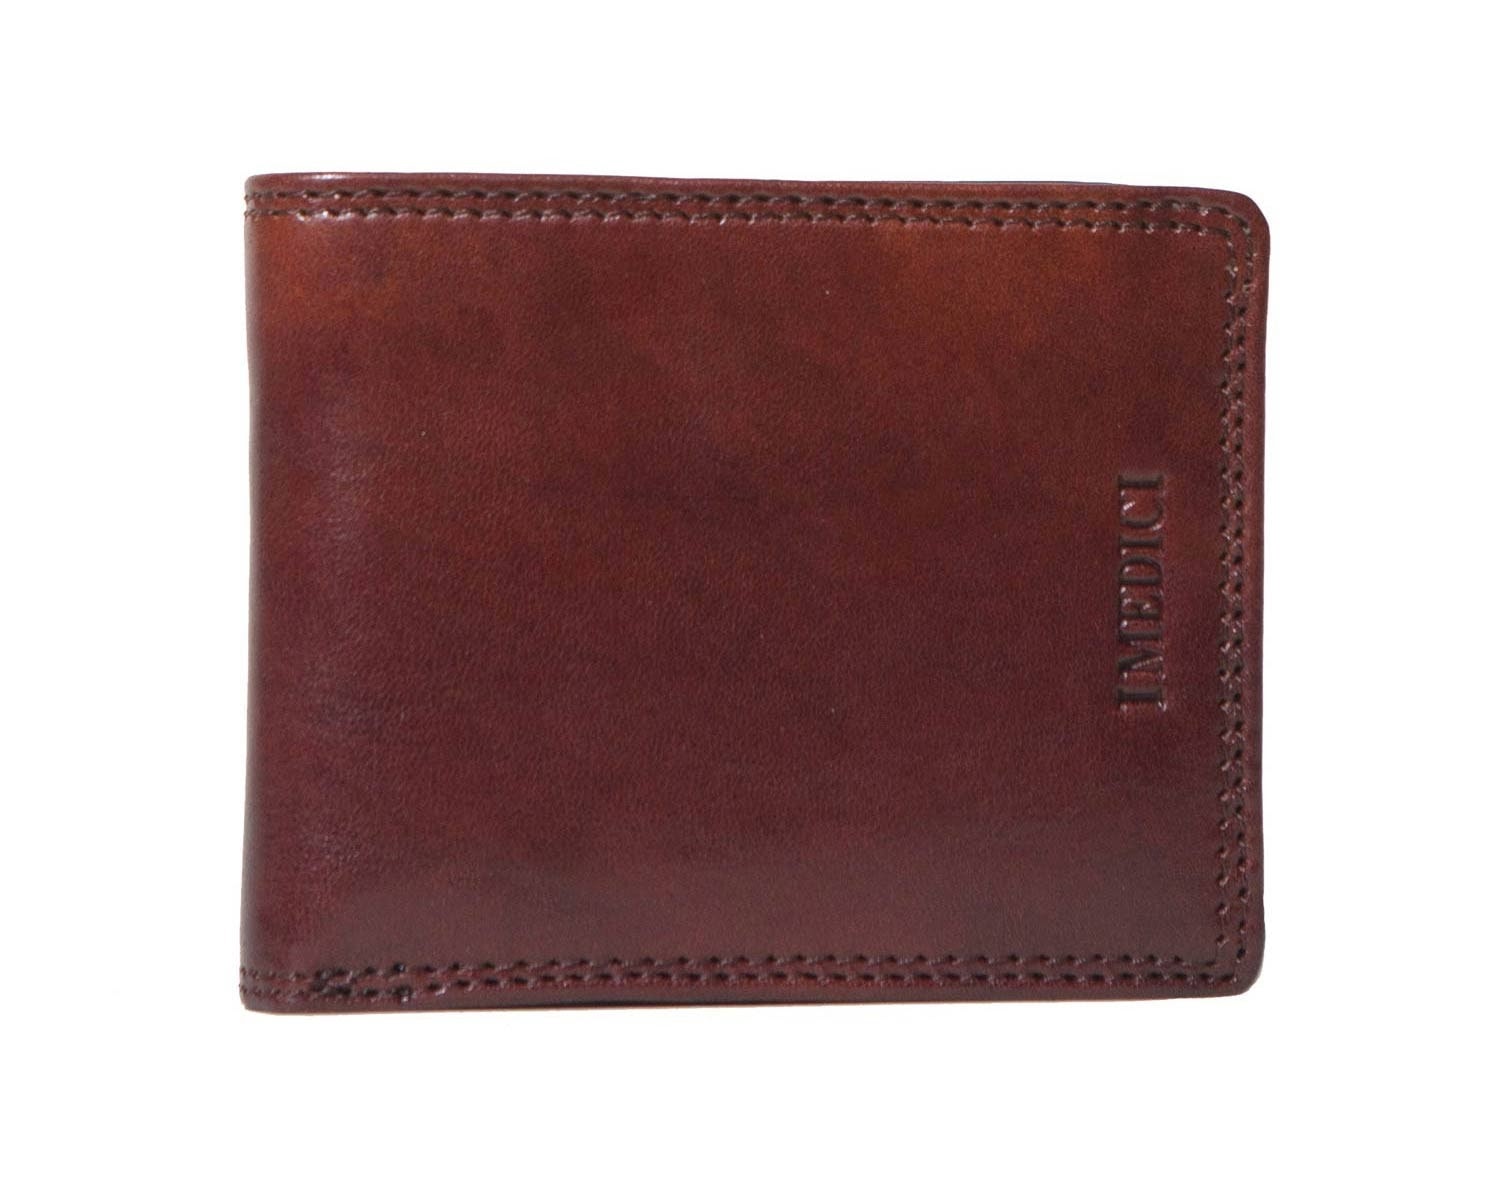 Are Leather Wallets a Long Term Investment?